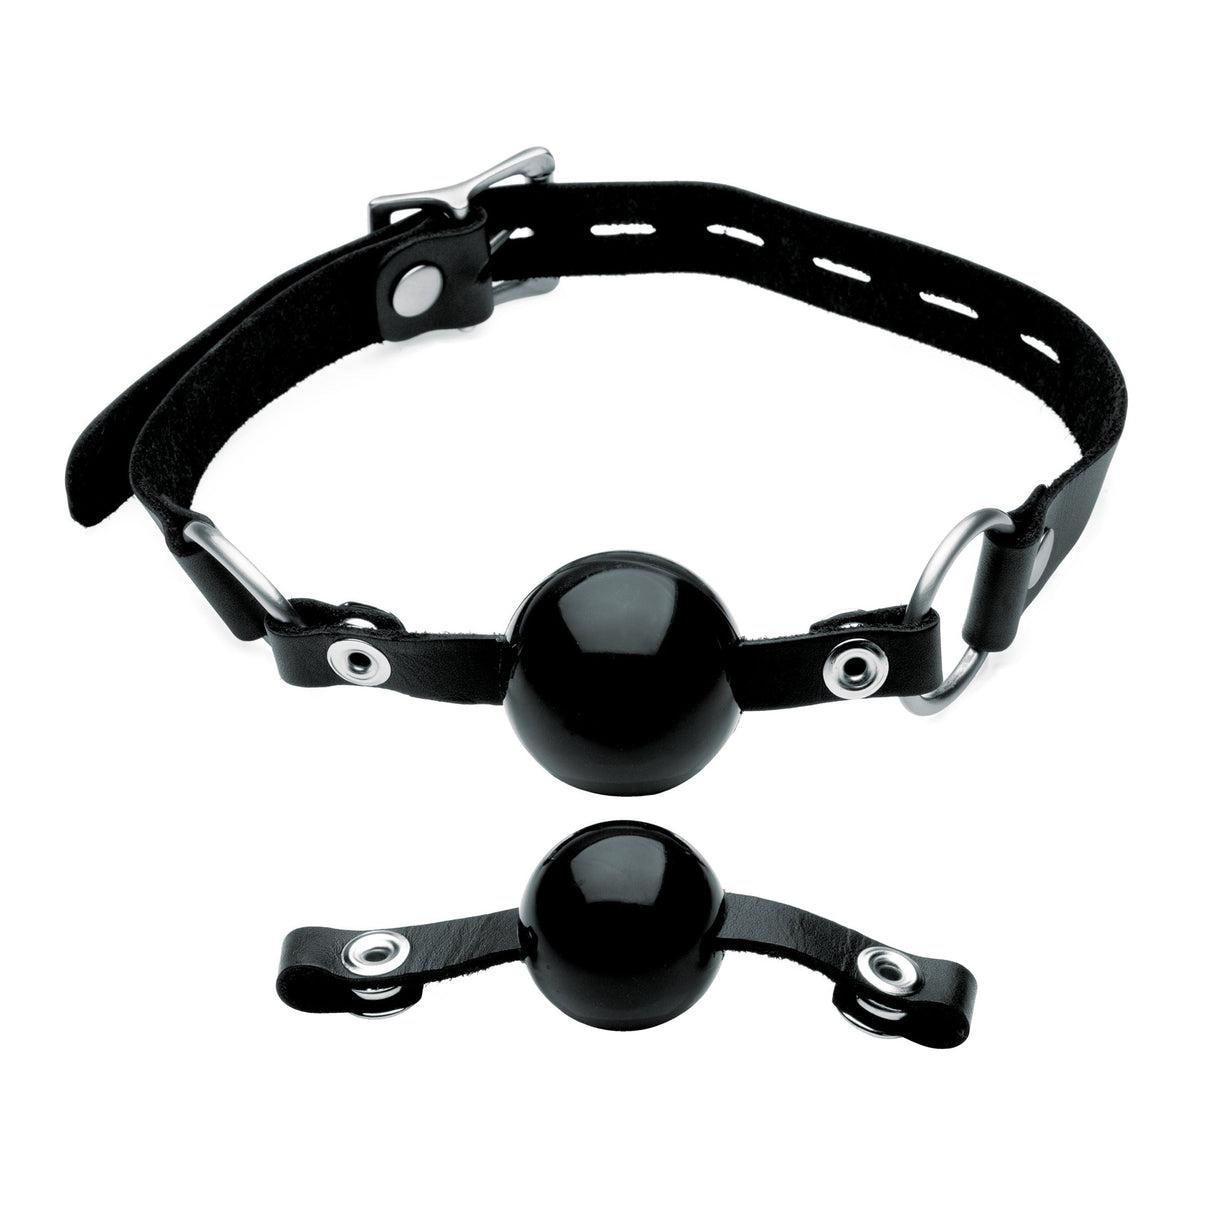 Isabella Sinclaire Interchangeable Silicone Ball Gag Set